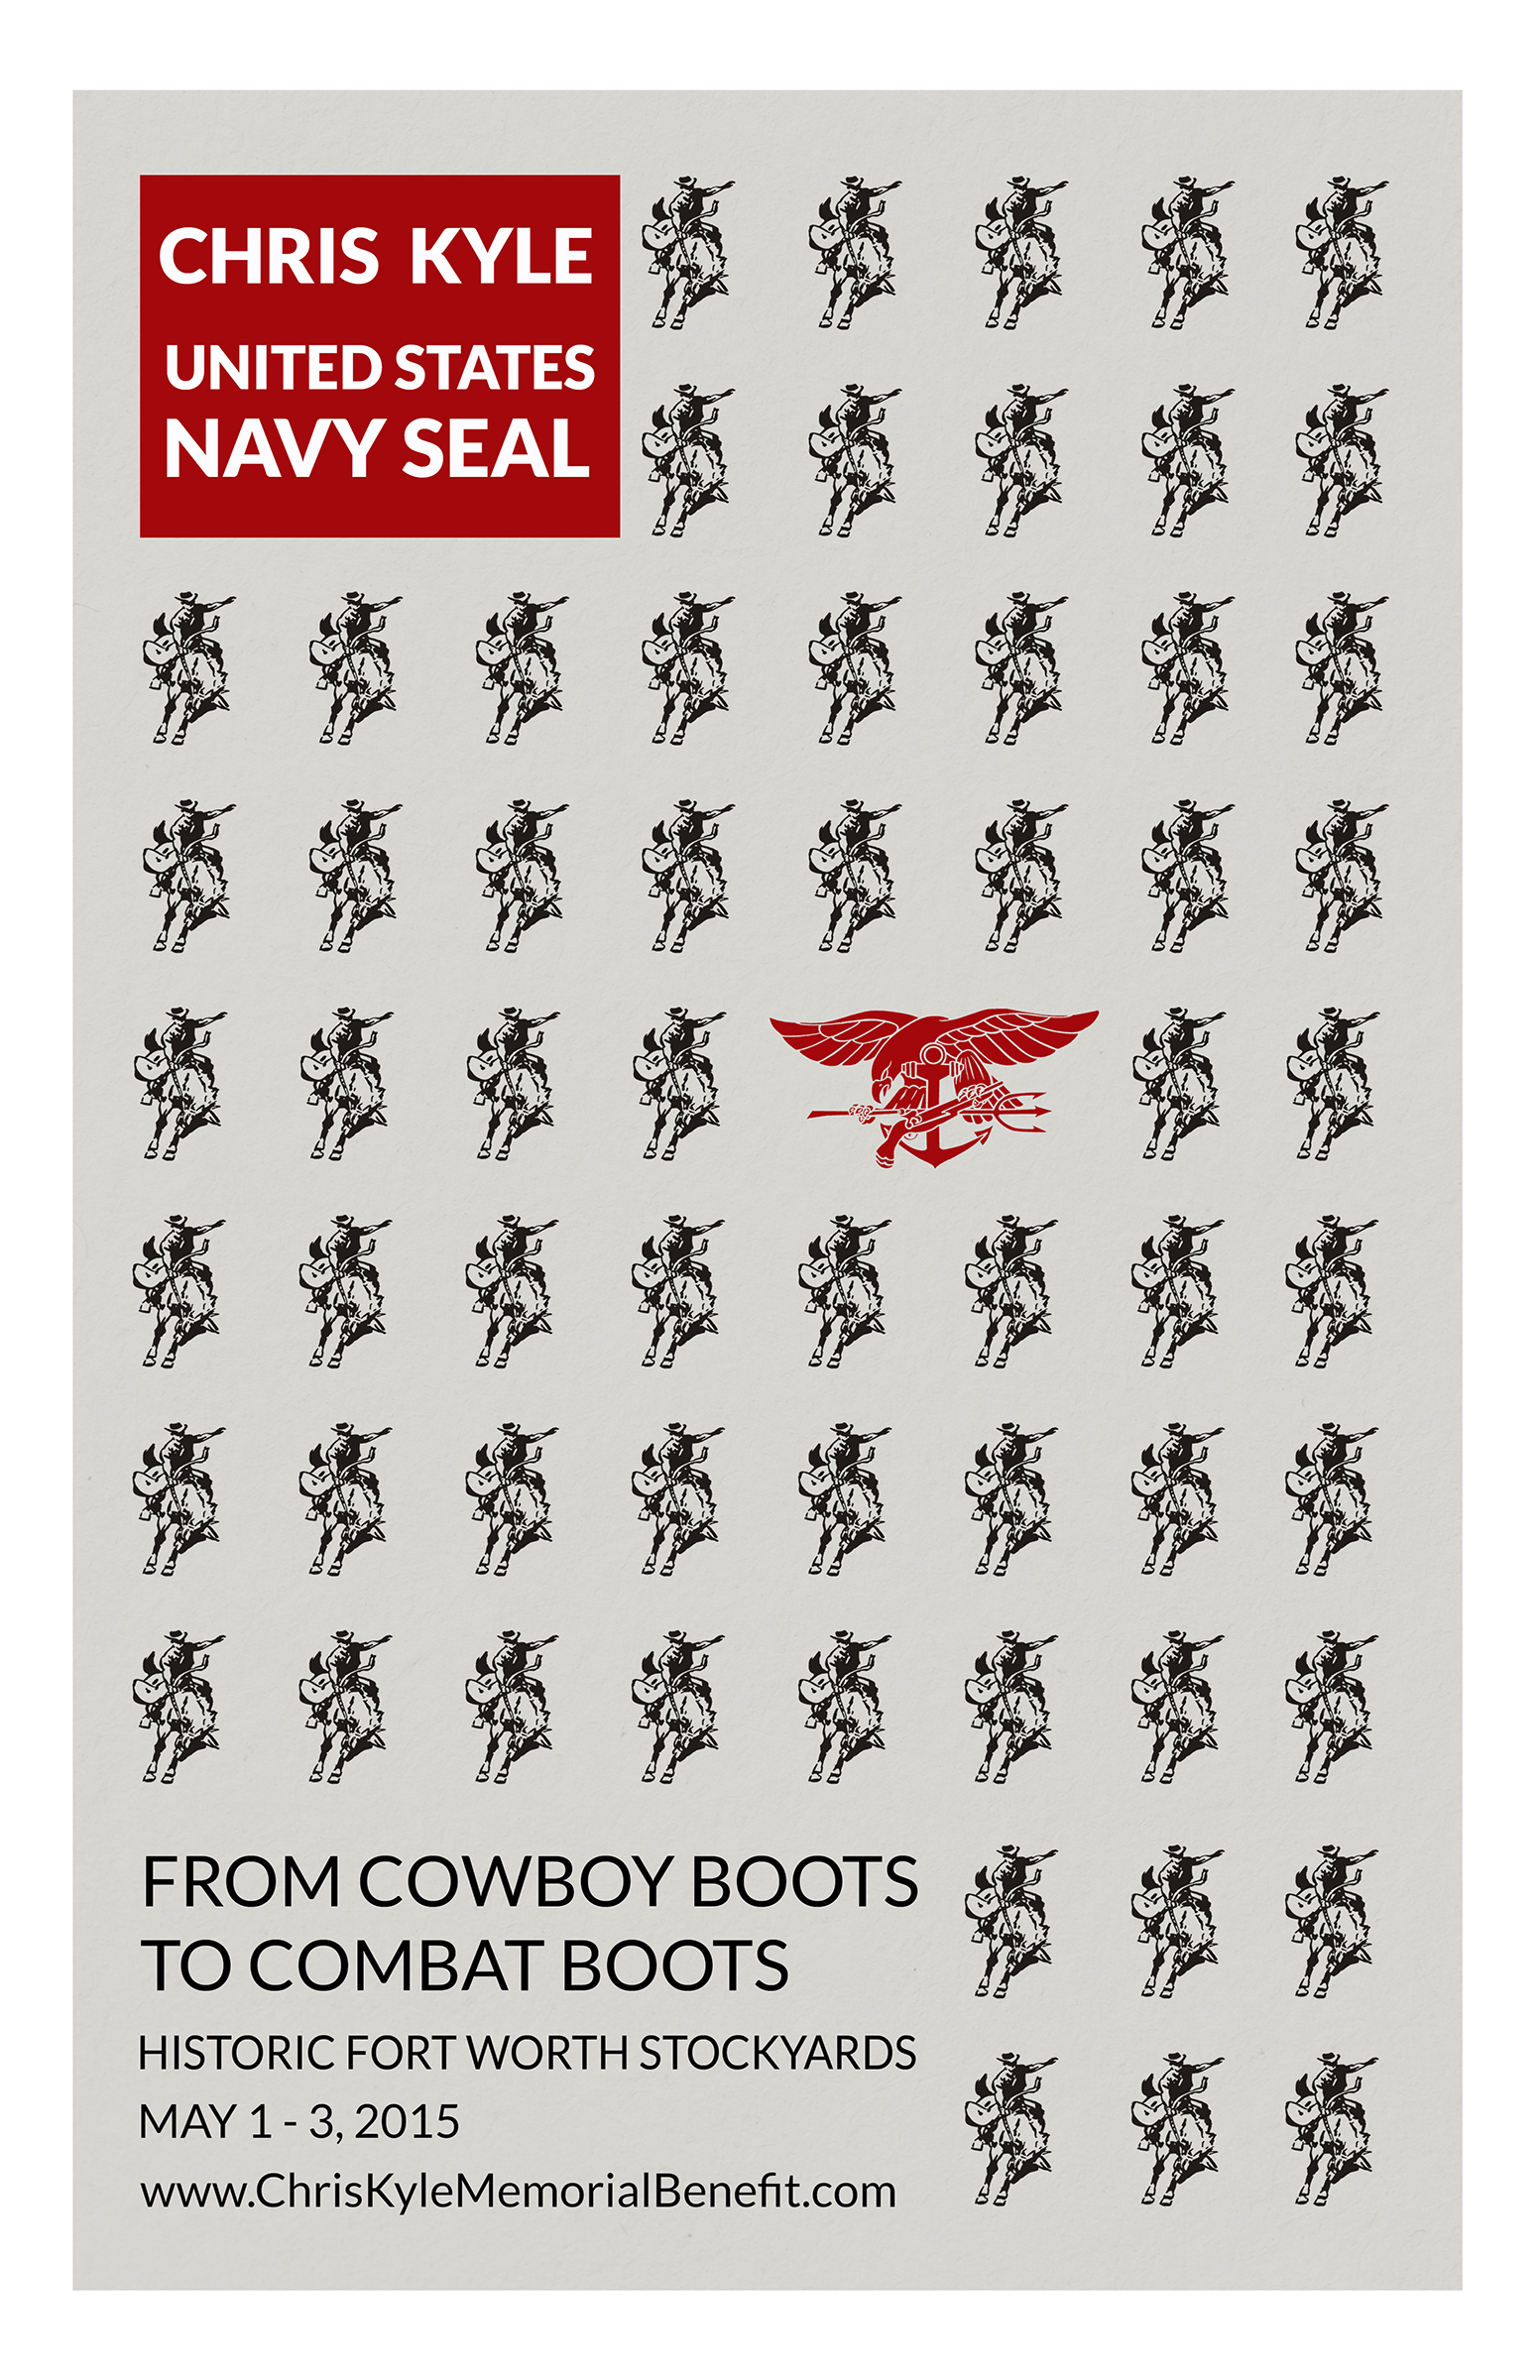 Chris Kyle 'From Cowboy Boots to Combat Boots' Poster